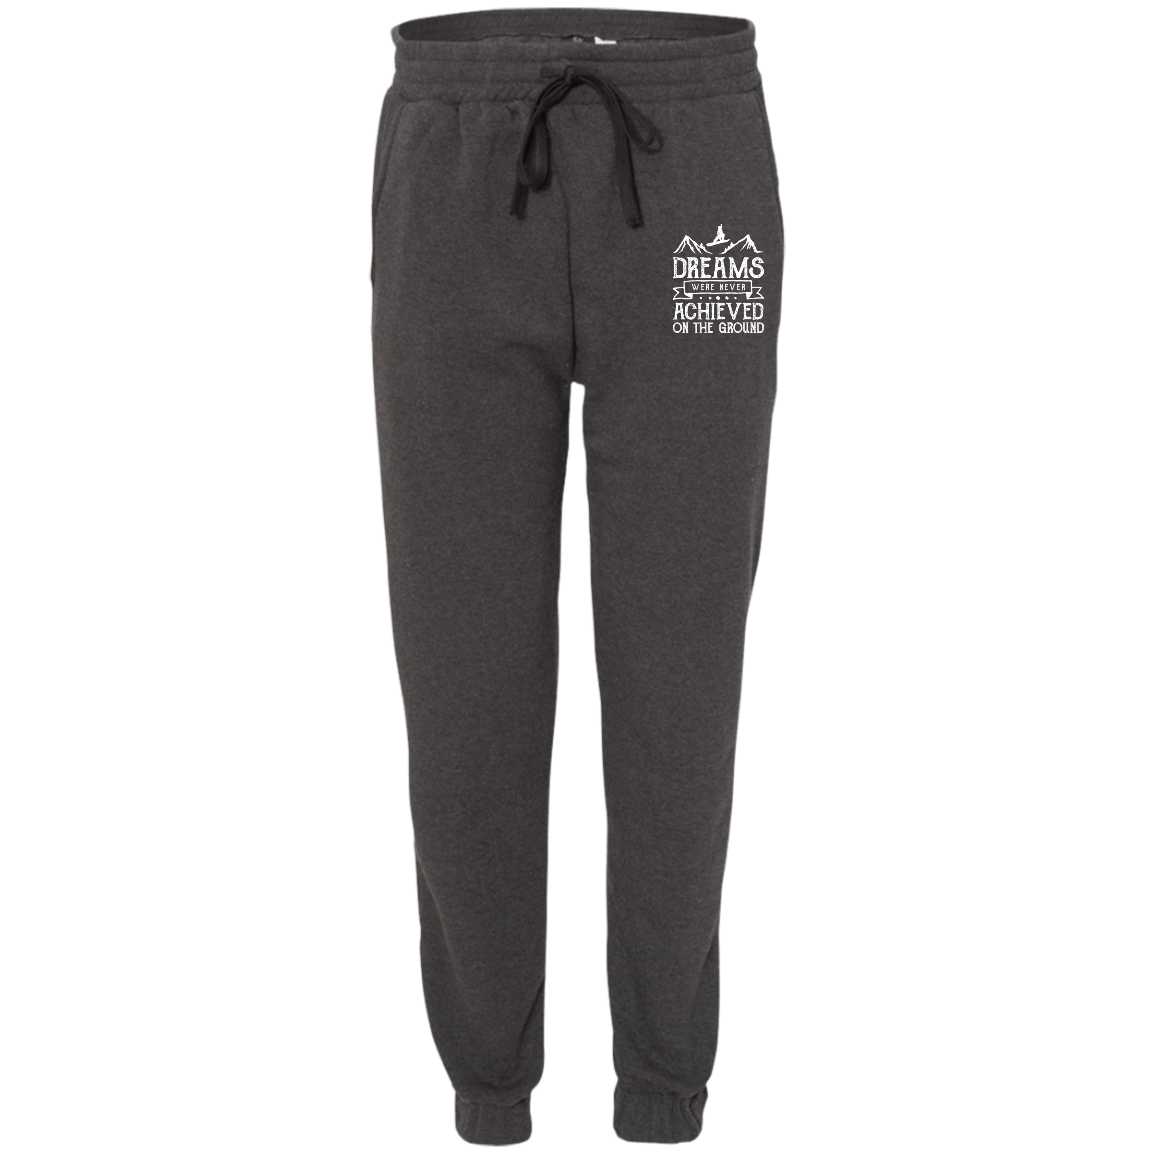 Dreams were Never Achieved on the Ground Men's Adult Fleece Joggers - Powderaddicts